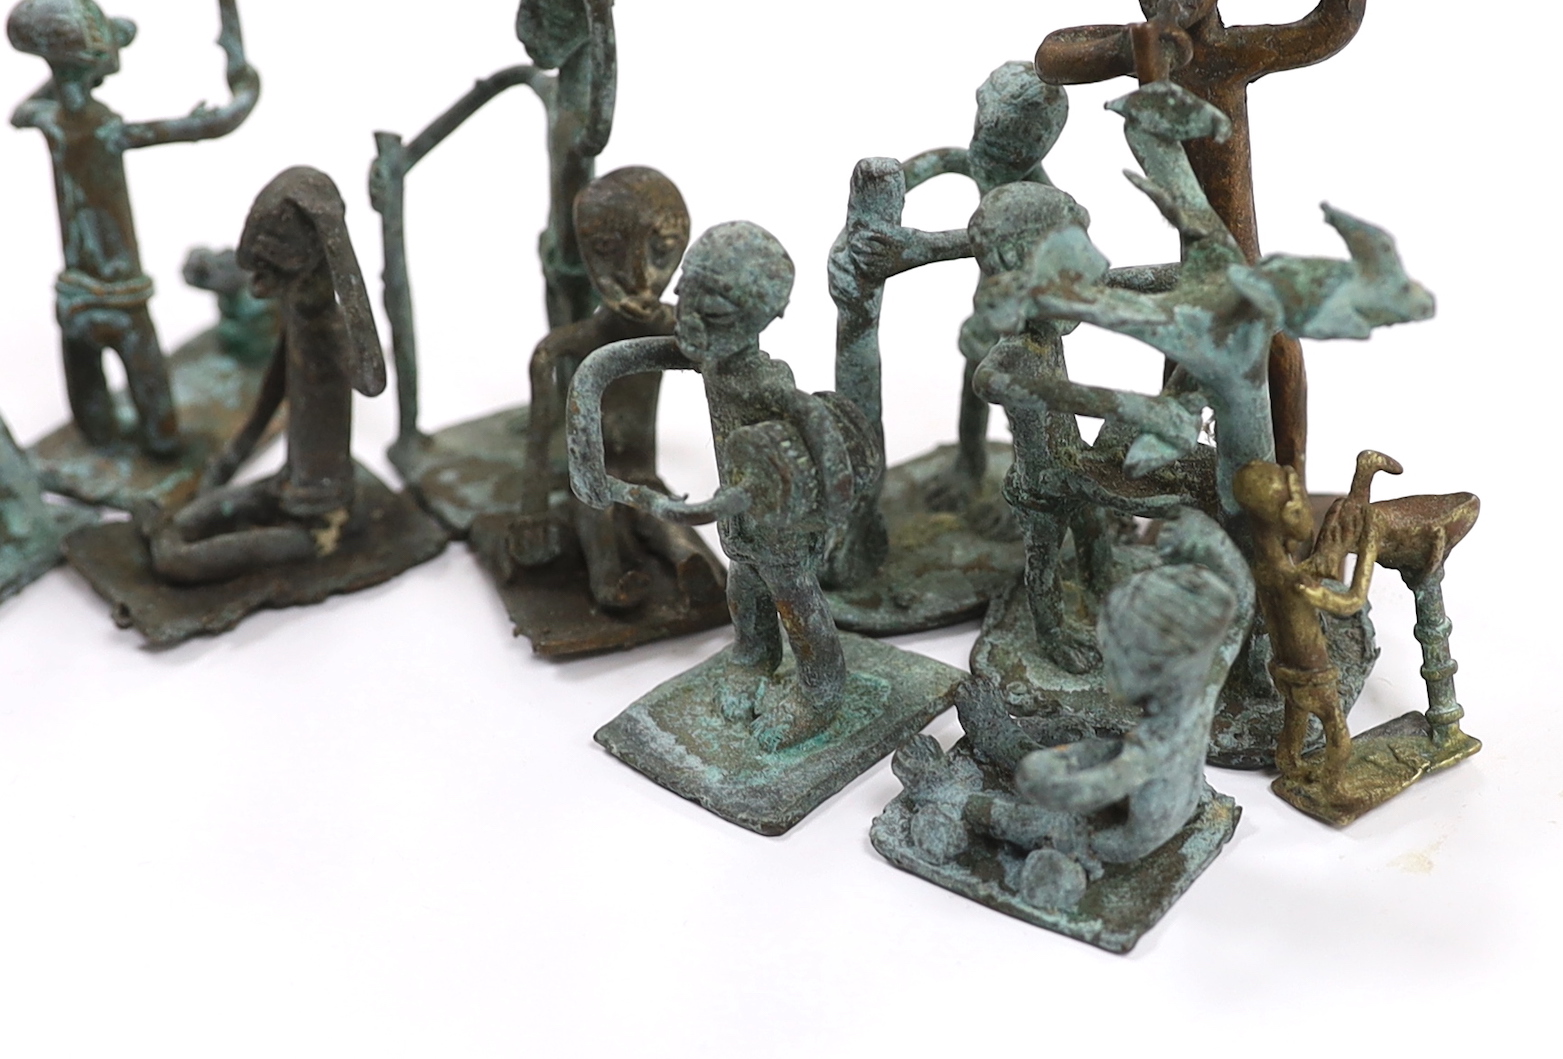 A collection of 20th century West African bronze figures, possibly gold weights, Ghana, Akan, box inscribed ‘West Africa. Gold Coast - attained in 1944 (Ghana)’, tallest 8.5cm